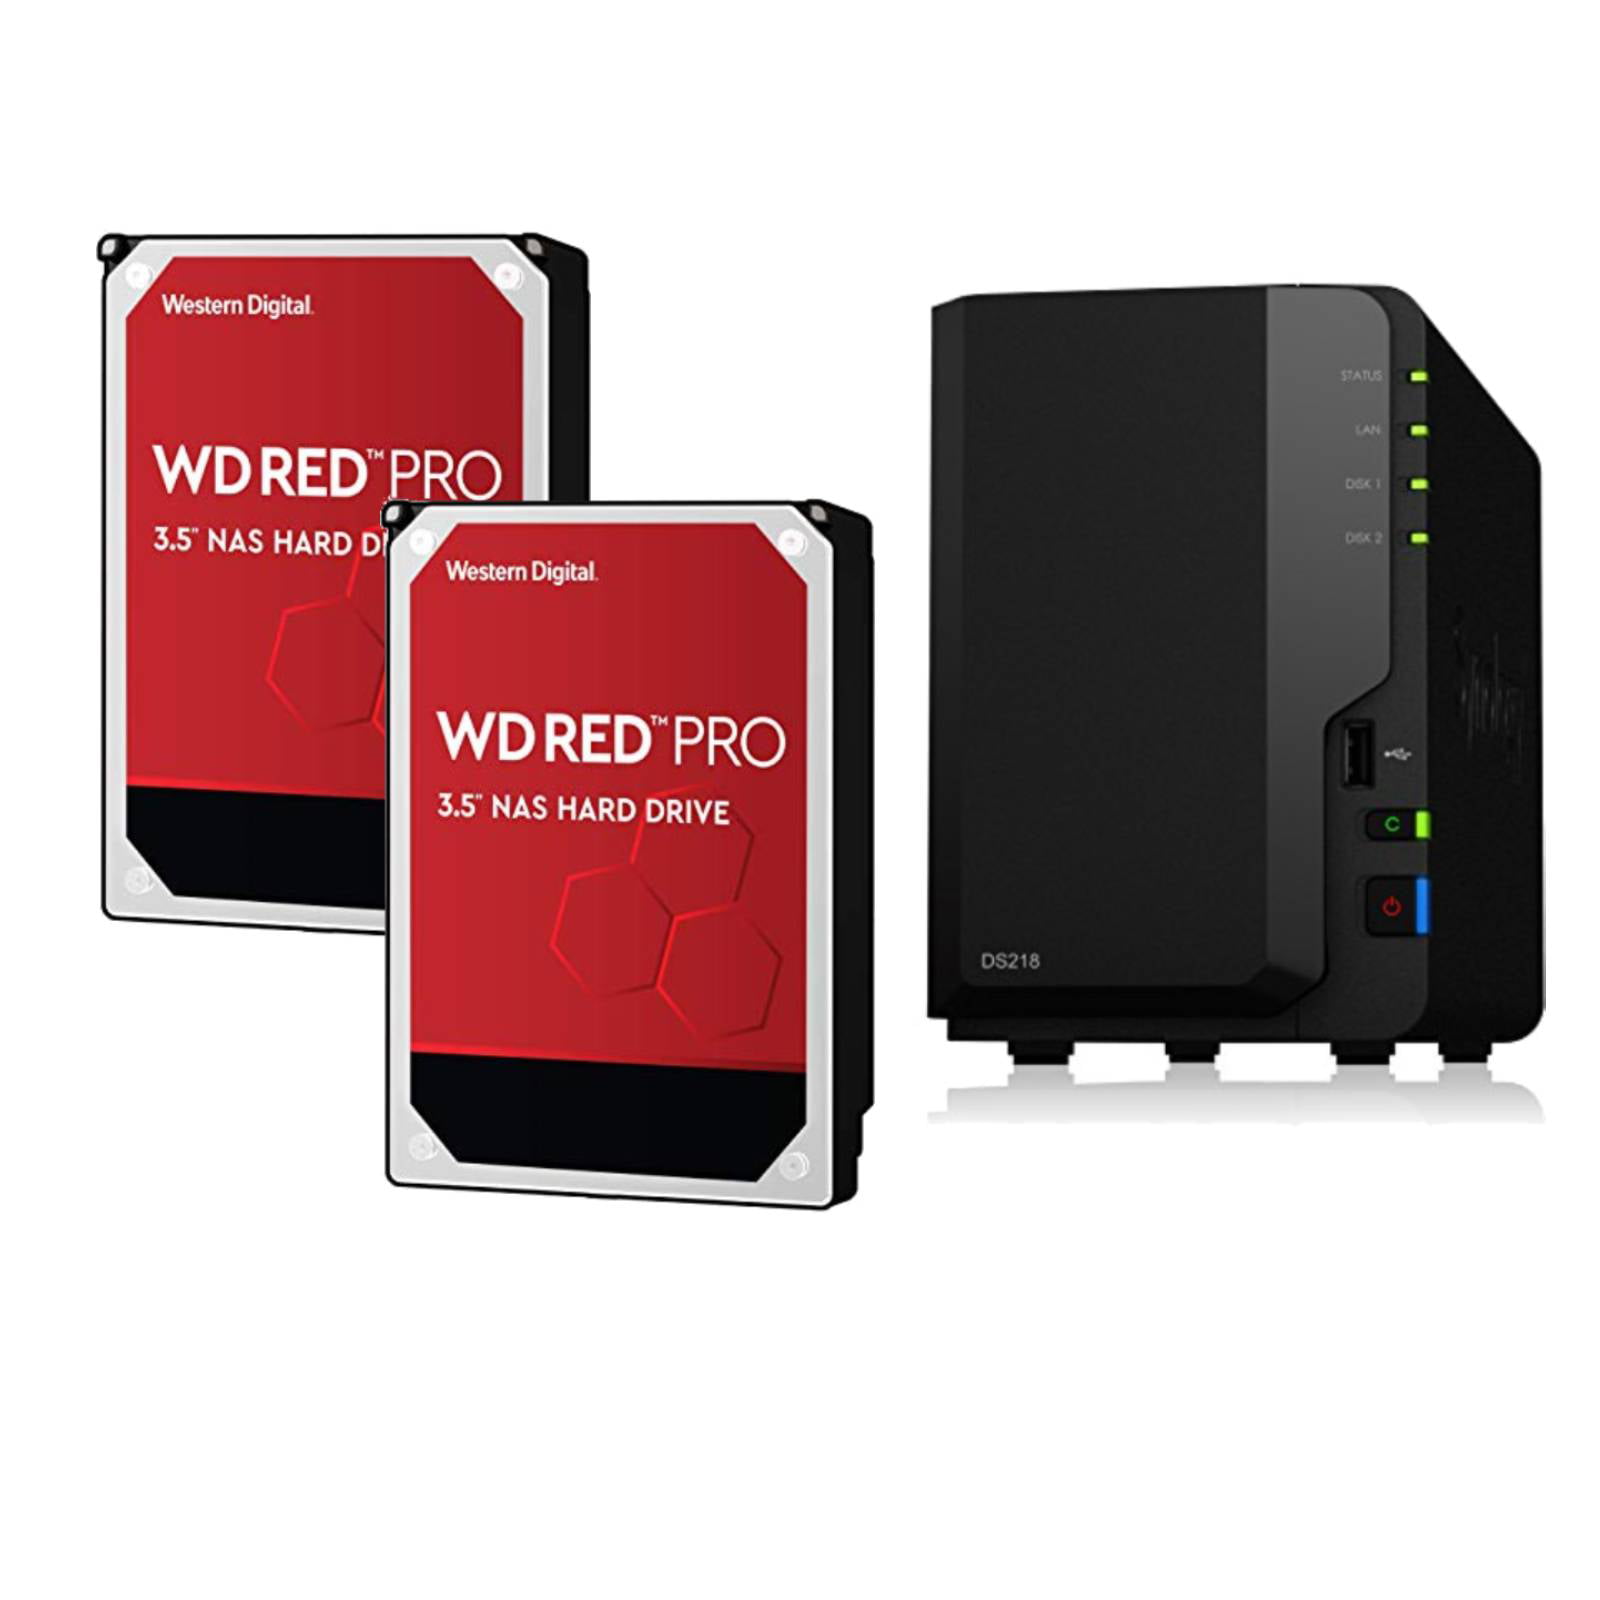 2 WD Red Pro 4TB Hard Drives + Synology 2 bay NAS DiskStation DS218  (Diskless) 